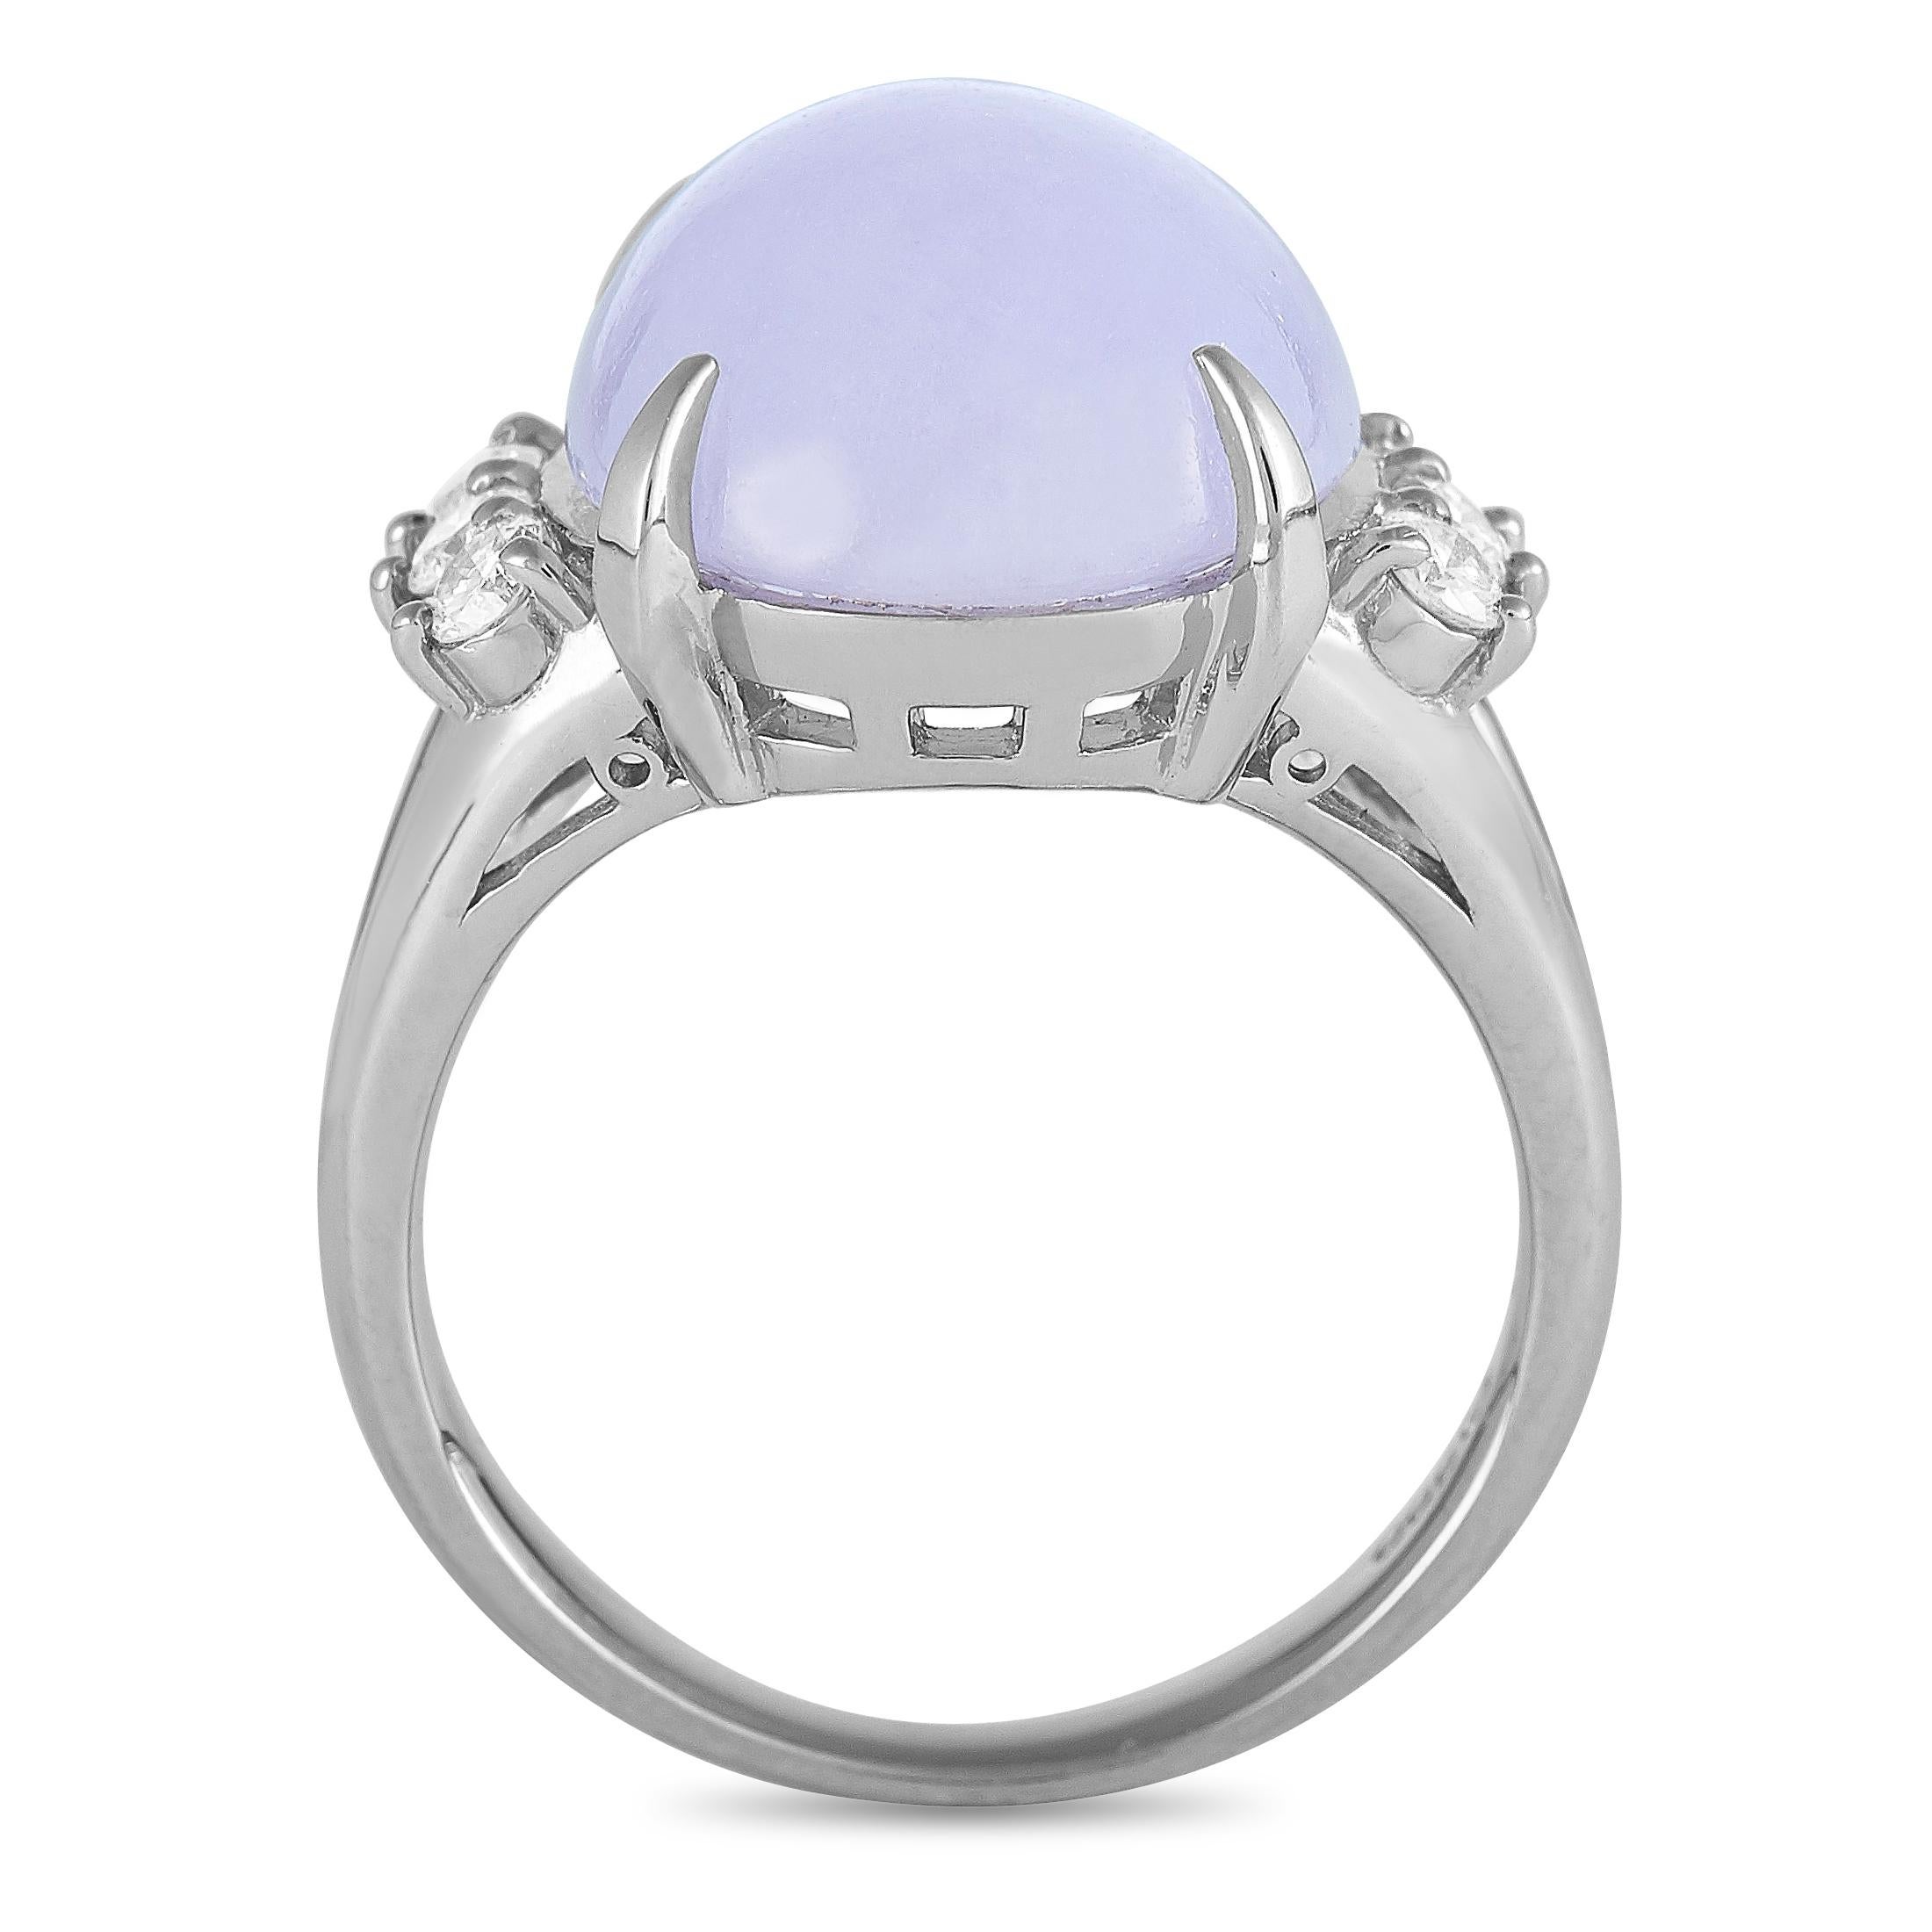 This LB Exclusive ring is made of platinum and embellished with an 11.31 ct lavender jade and a total of 0.27 carats of diamonds. The ring weighs 10.5 grams and boasts band thickness of 3 mm and top height of 8 mm, while top dimensions measure 16 by